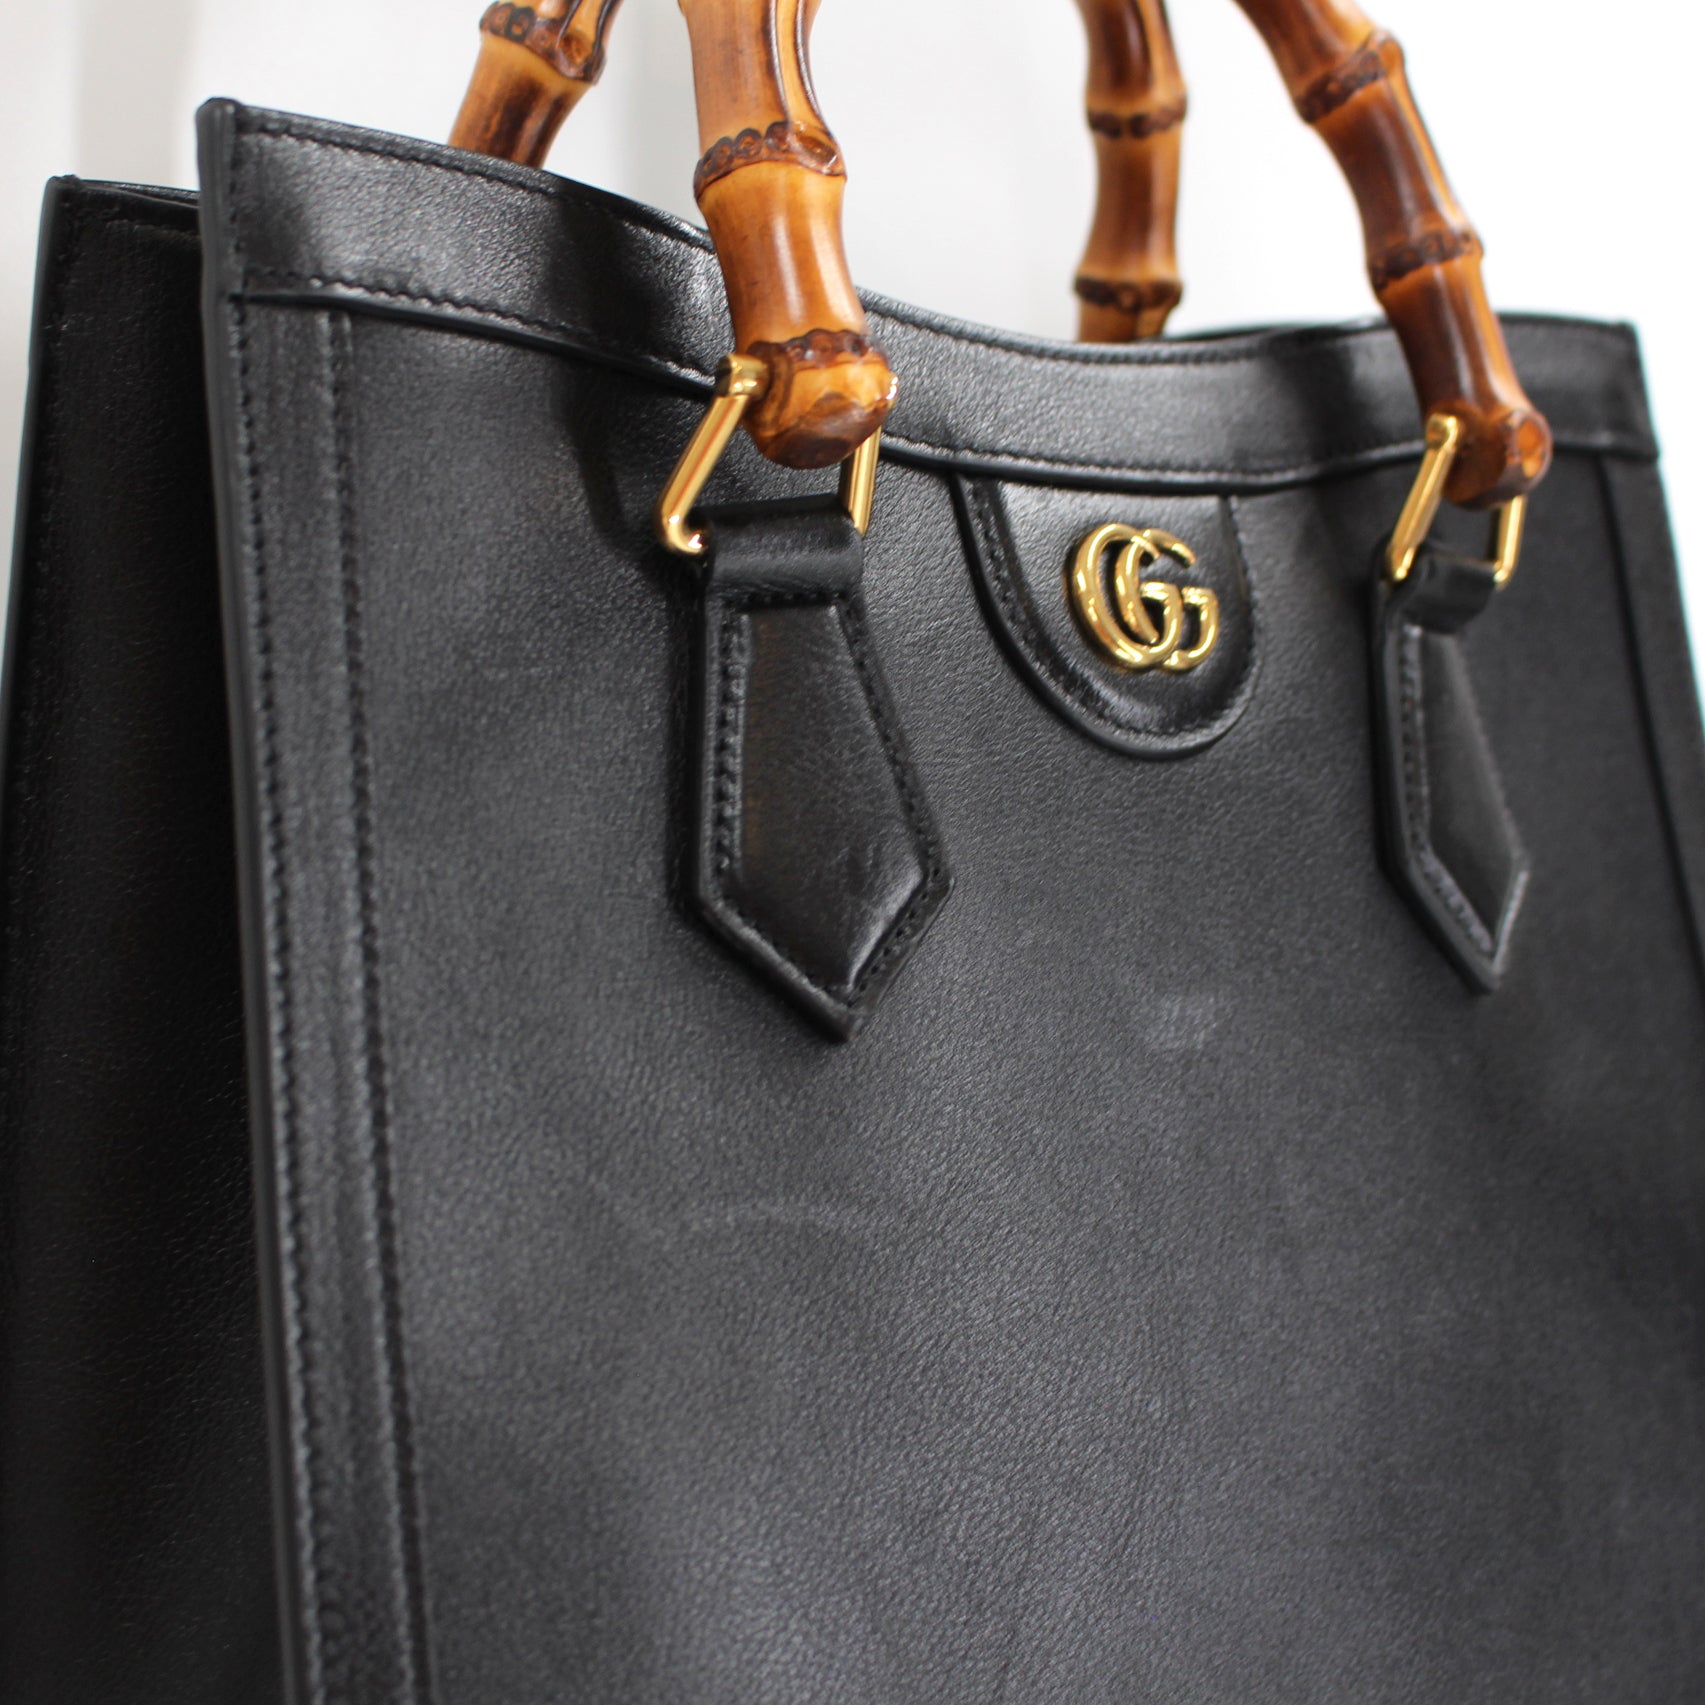 Gucci Diana Large Leather Tote Bag in Black - Gucci